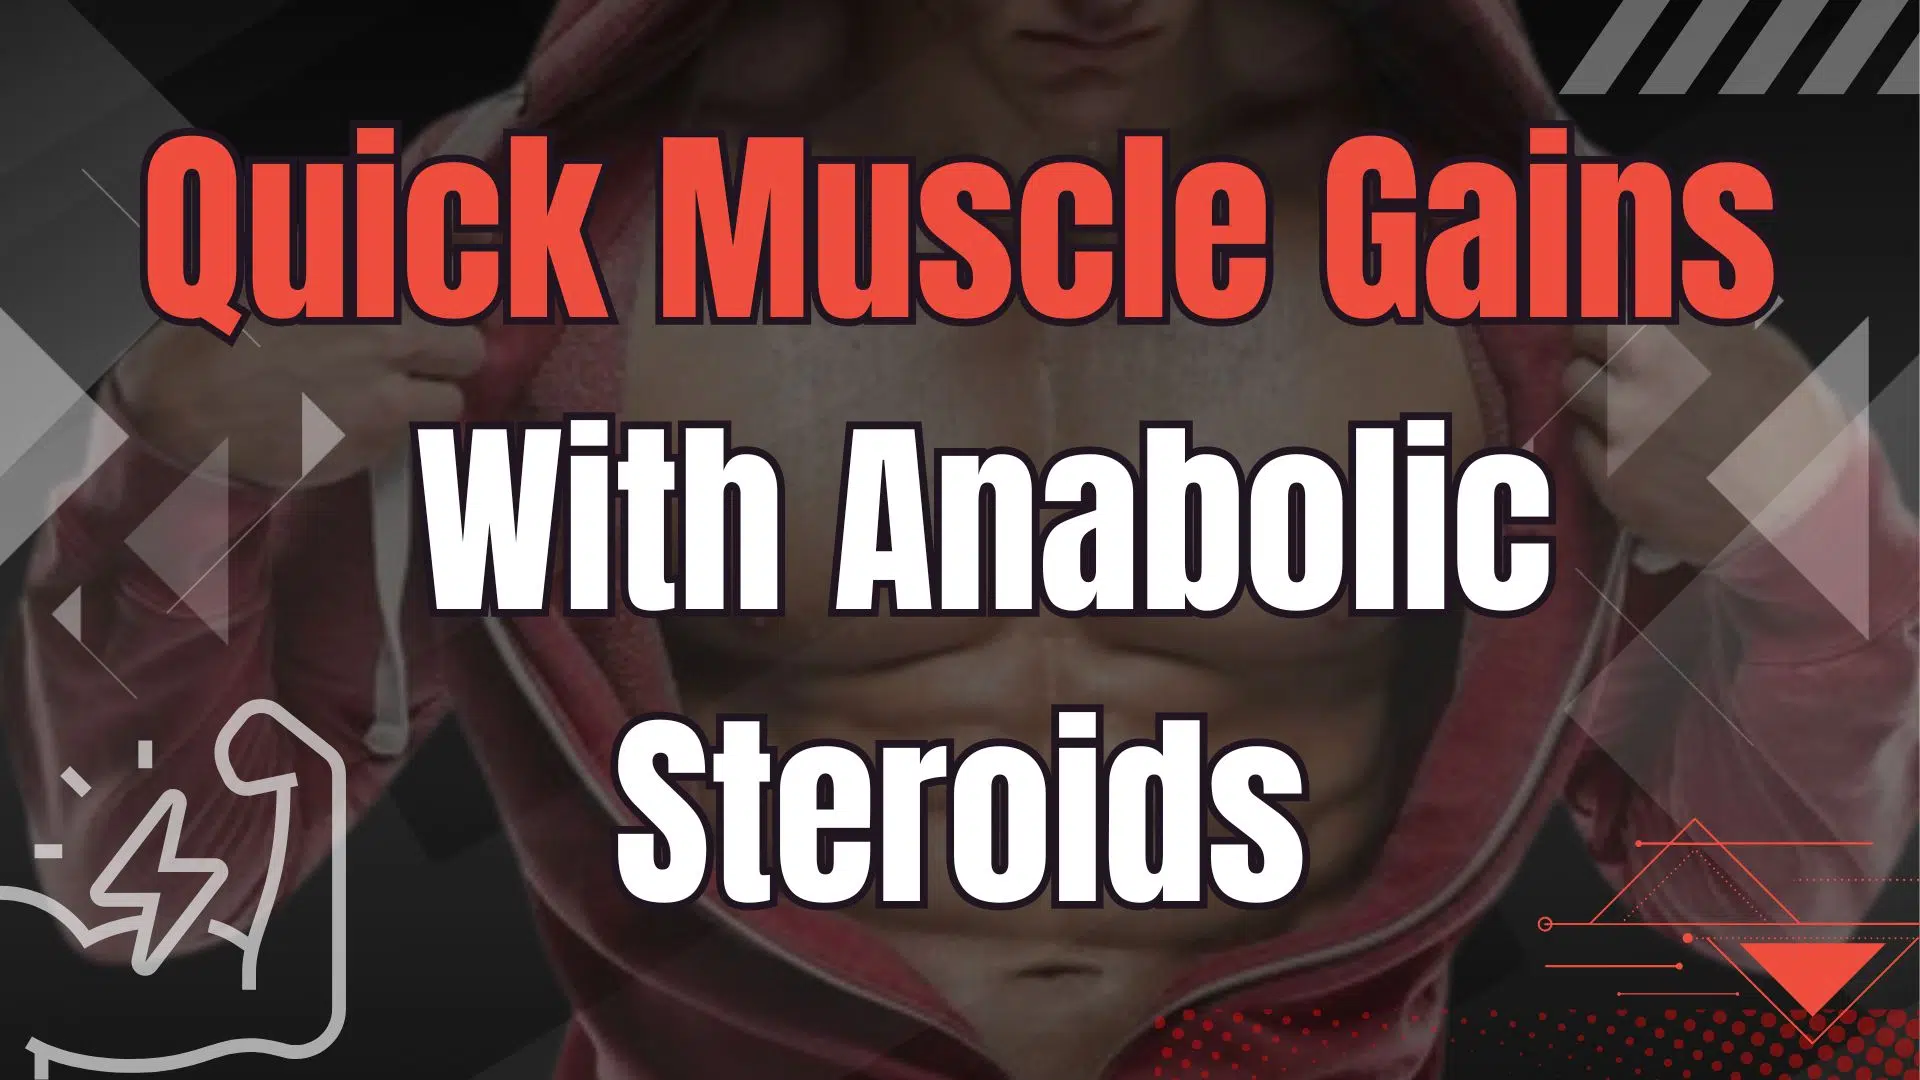 Quick Muscle Gains With Anabolic Steroids